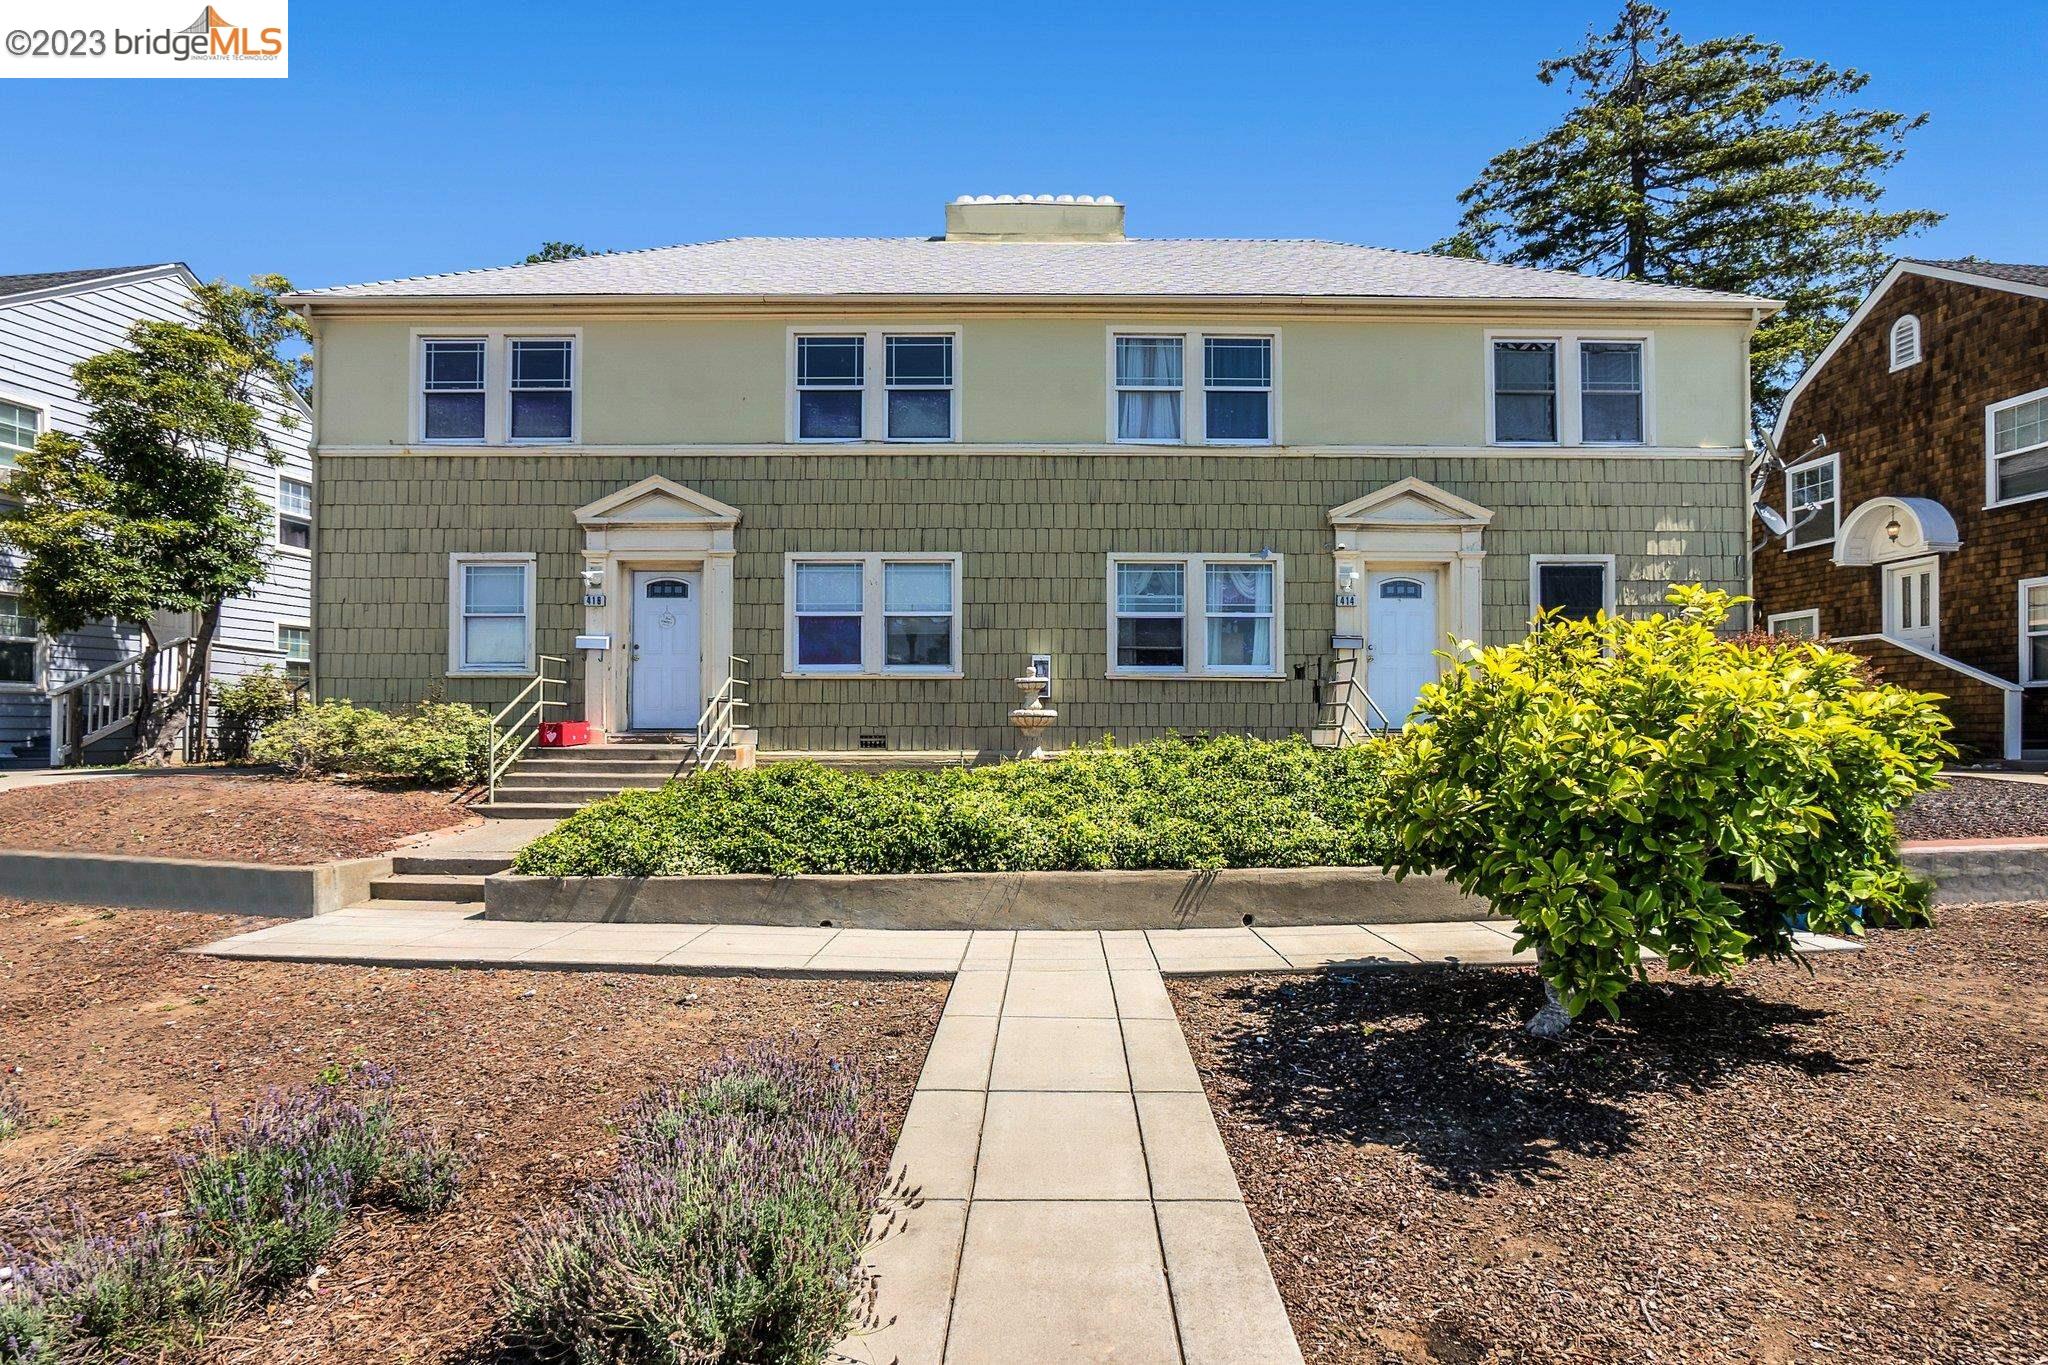 The large fourplex property consists of an ideal four 2-bedroom, 1-bathroom unit mix in Vallejo. 412 Wilson boasts prime waterfront location with views of Mare Island and the bridge. The units have been completely renovated including: Granite kitchen countertops, New Dishwasher, Flooring, Dual Pane Windows, and more. The property is in a Desirable Vallejo neighborhood with Hiking trails across the street and Waterfront views. The building features Separately Metered PG&E, Laundry Hookups in Unit, & Washer and Dryers. The upside rent potential is perfect for opportunistic Buyers who want a strong cash flowing building with room to add more value.